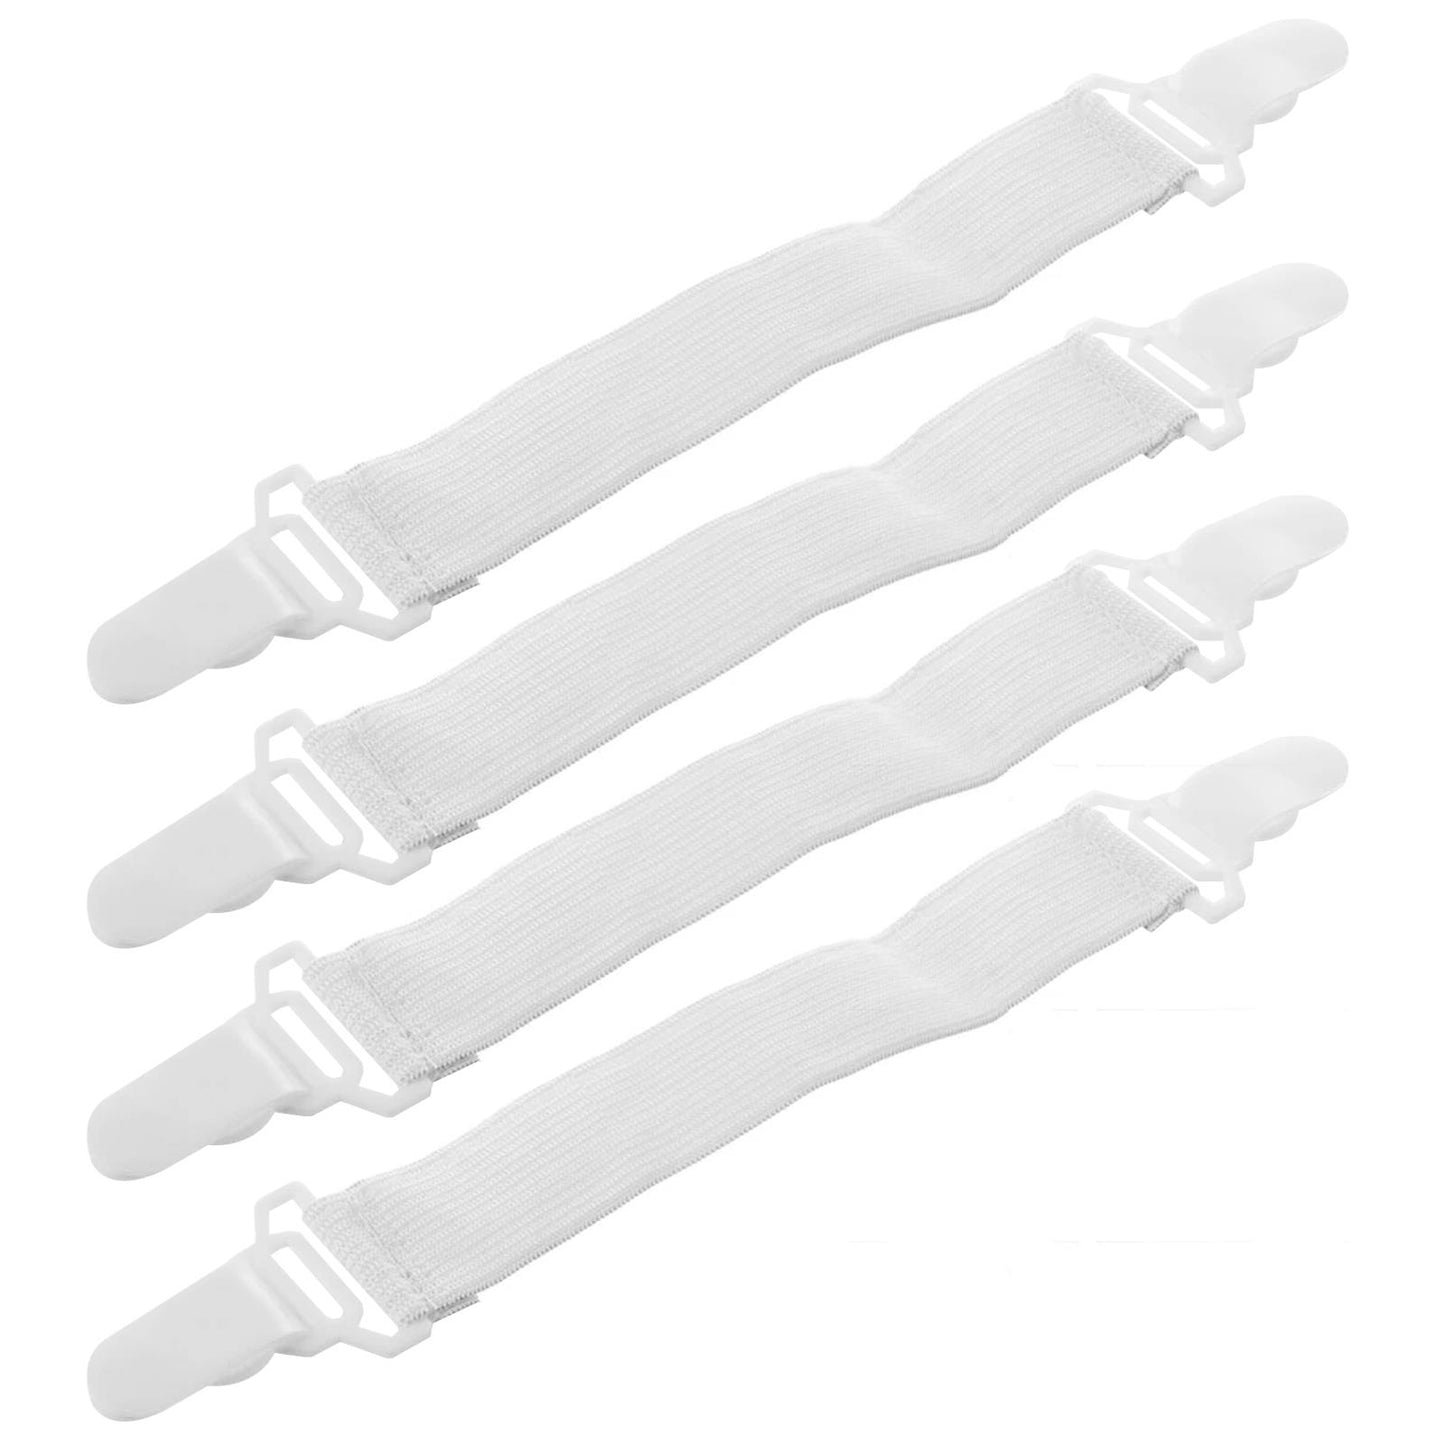 4 x Bed Sheet Grippers